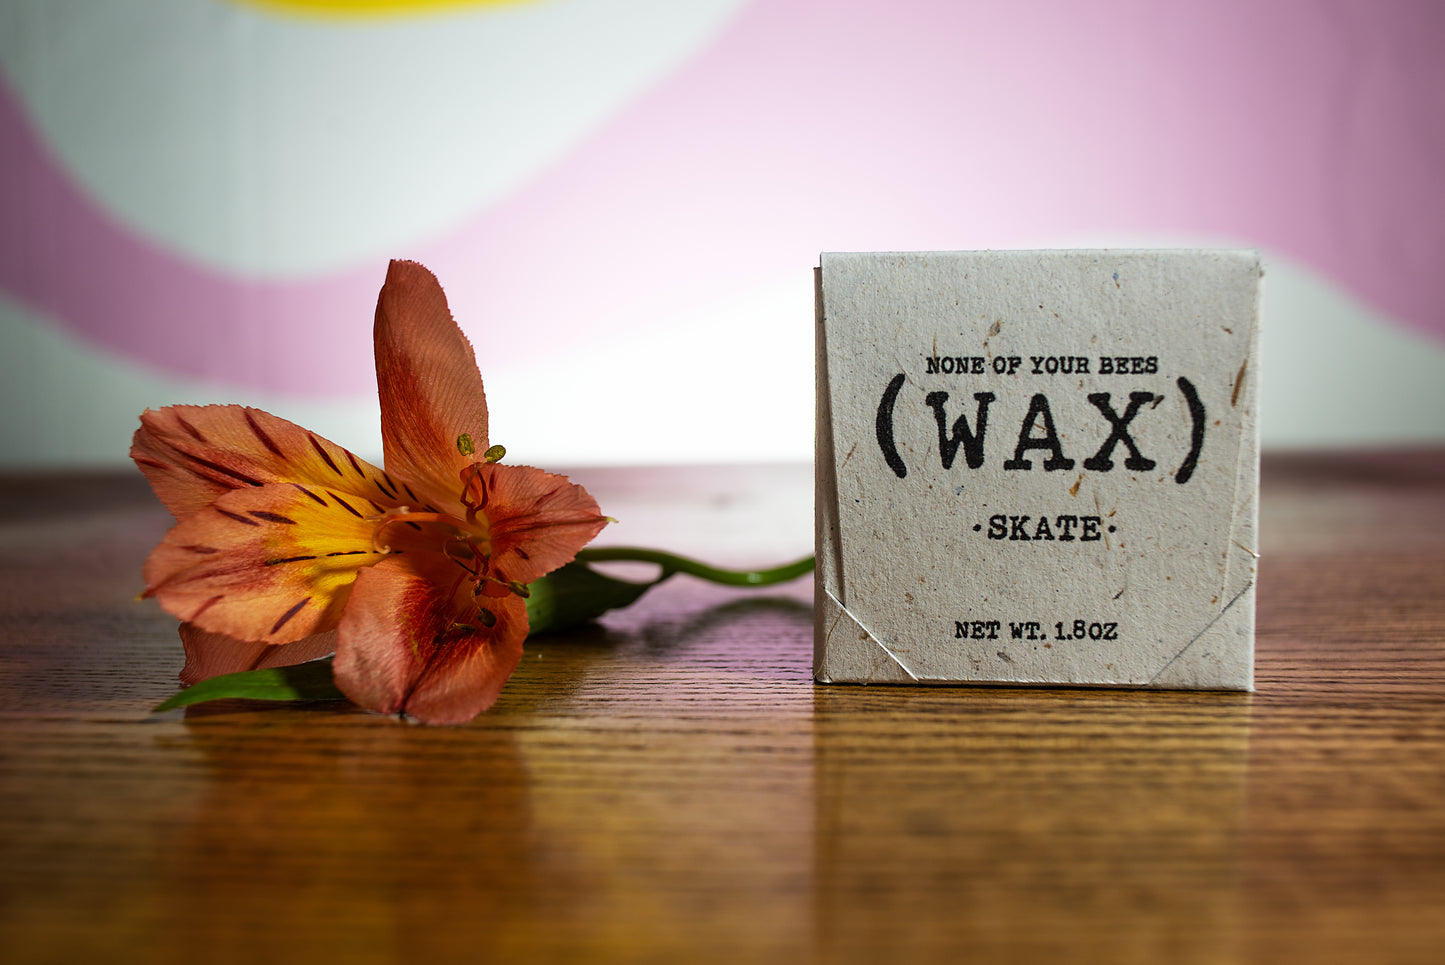 NONE OF YOUR BEES(WAX): Skate